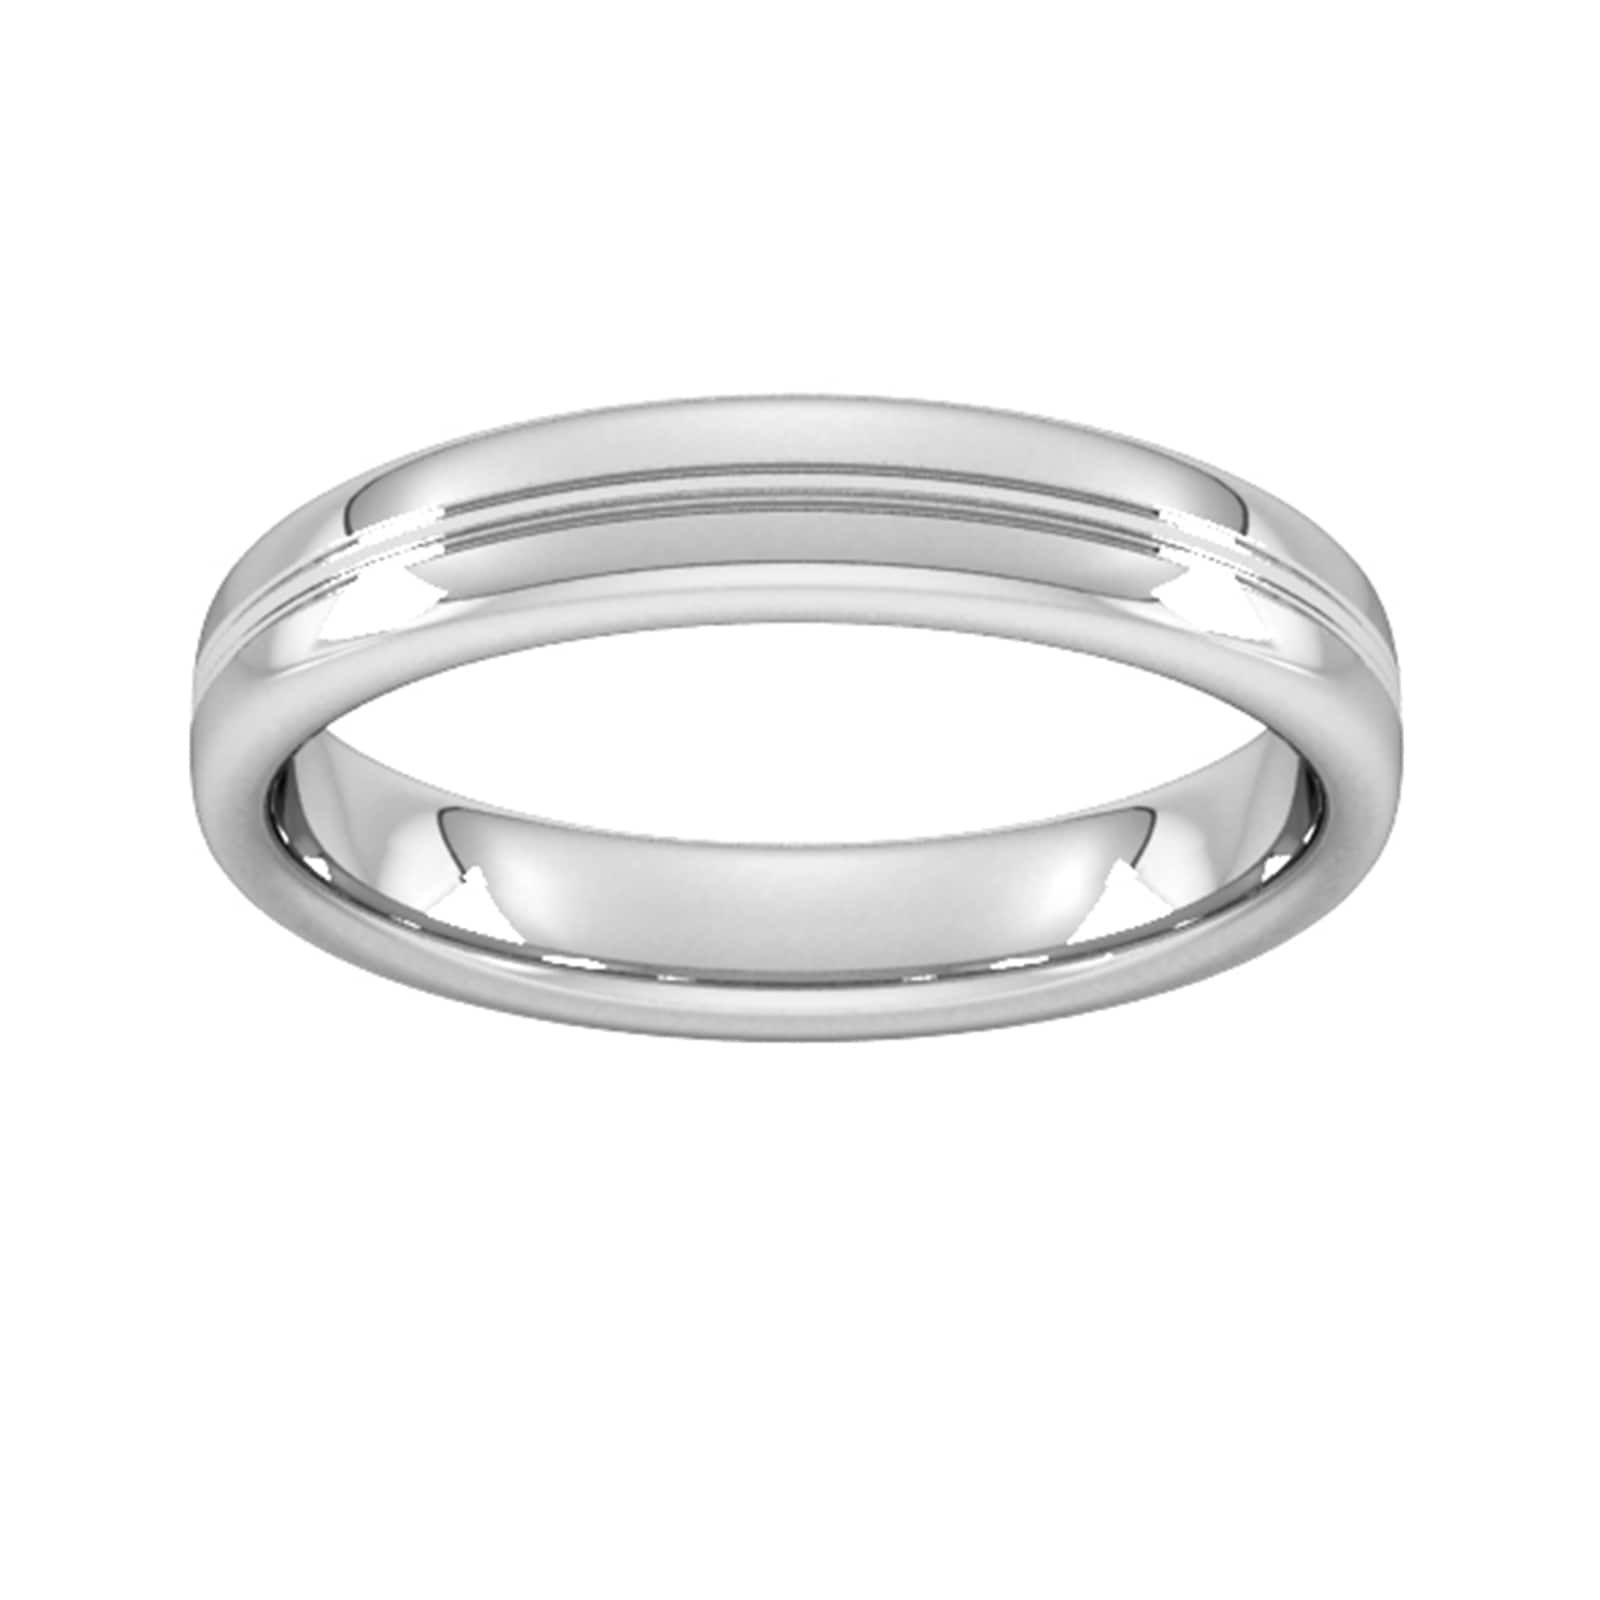 4mm Slight Court Standard Grooved Polished Finish Wedding Ring In 950 Palladium - Ring Size G